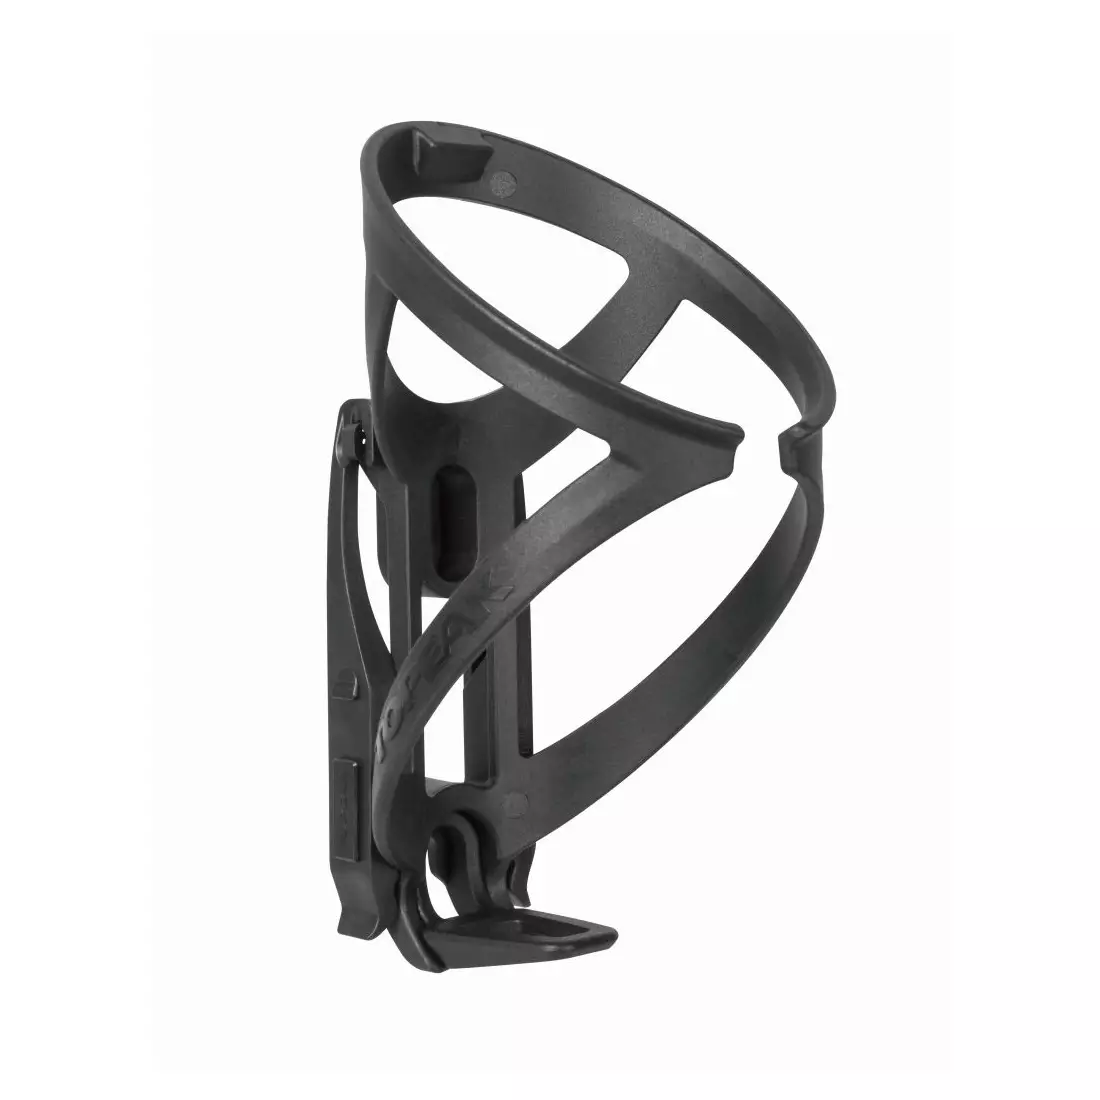 TOPEAK bottle cage compatible with accessories NINJA MASTRER+ CAGE X1 black T-TNJC-X1